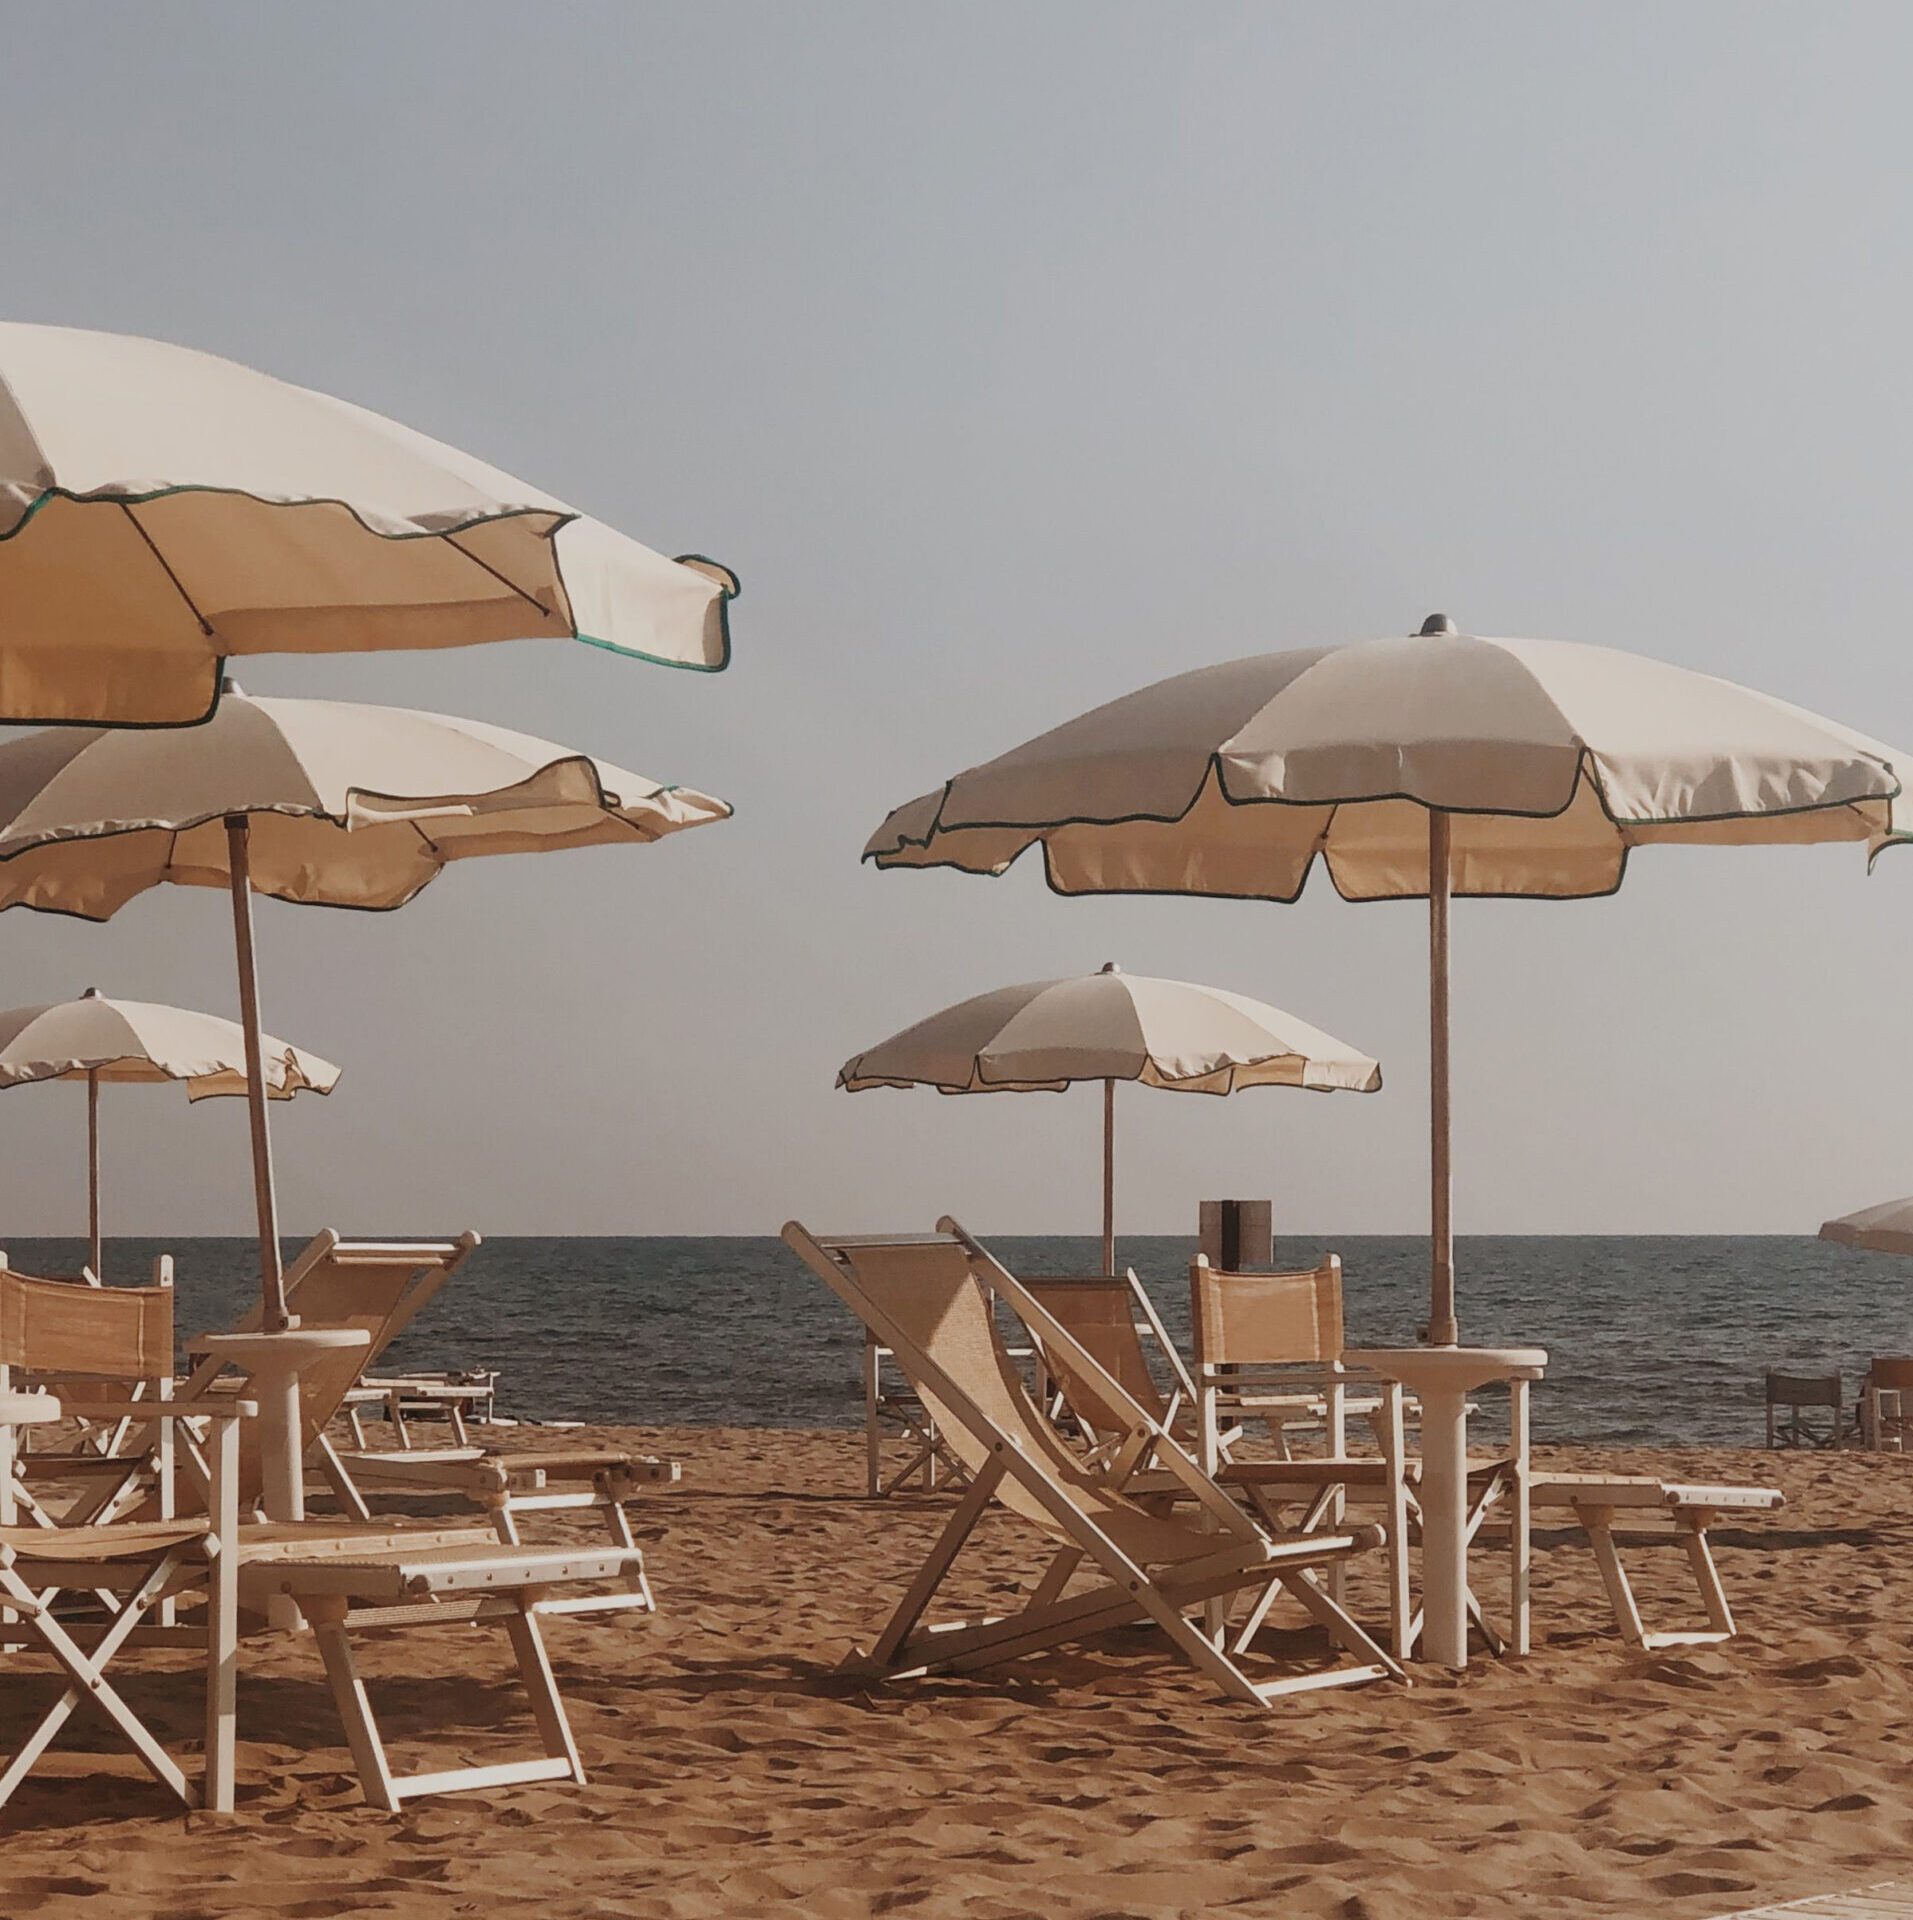 Sunny day at the beach, part of Tuscan Sun, collection featuring stock images and videos of warm summer days in the Tuscan countryside perfect for your social media posts.